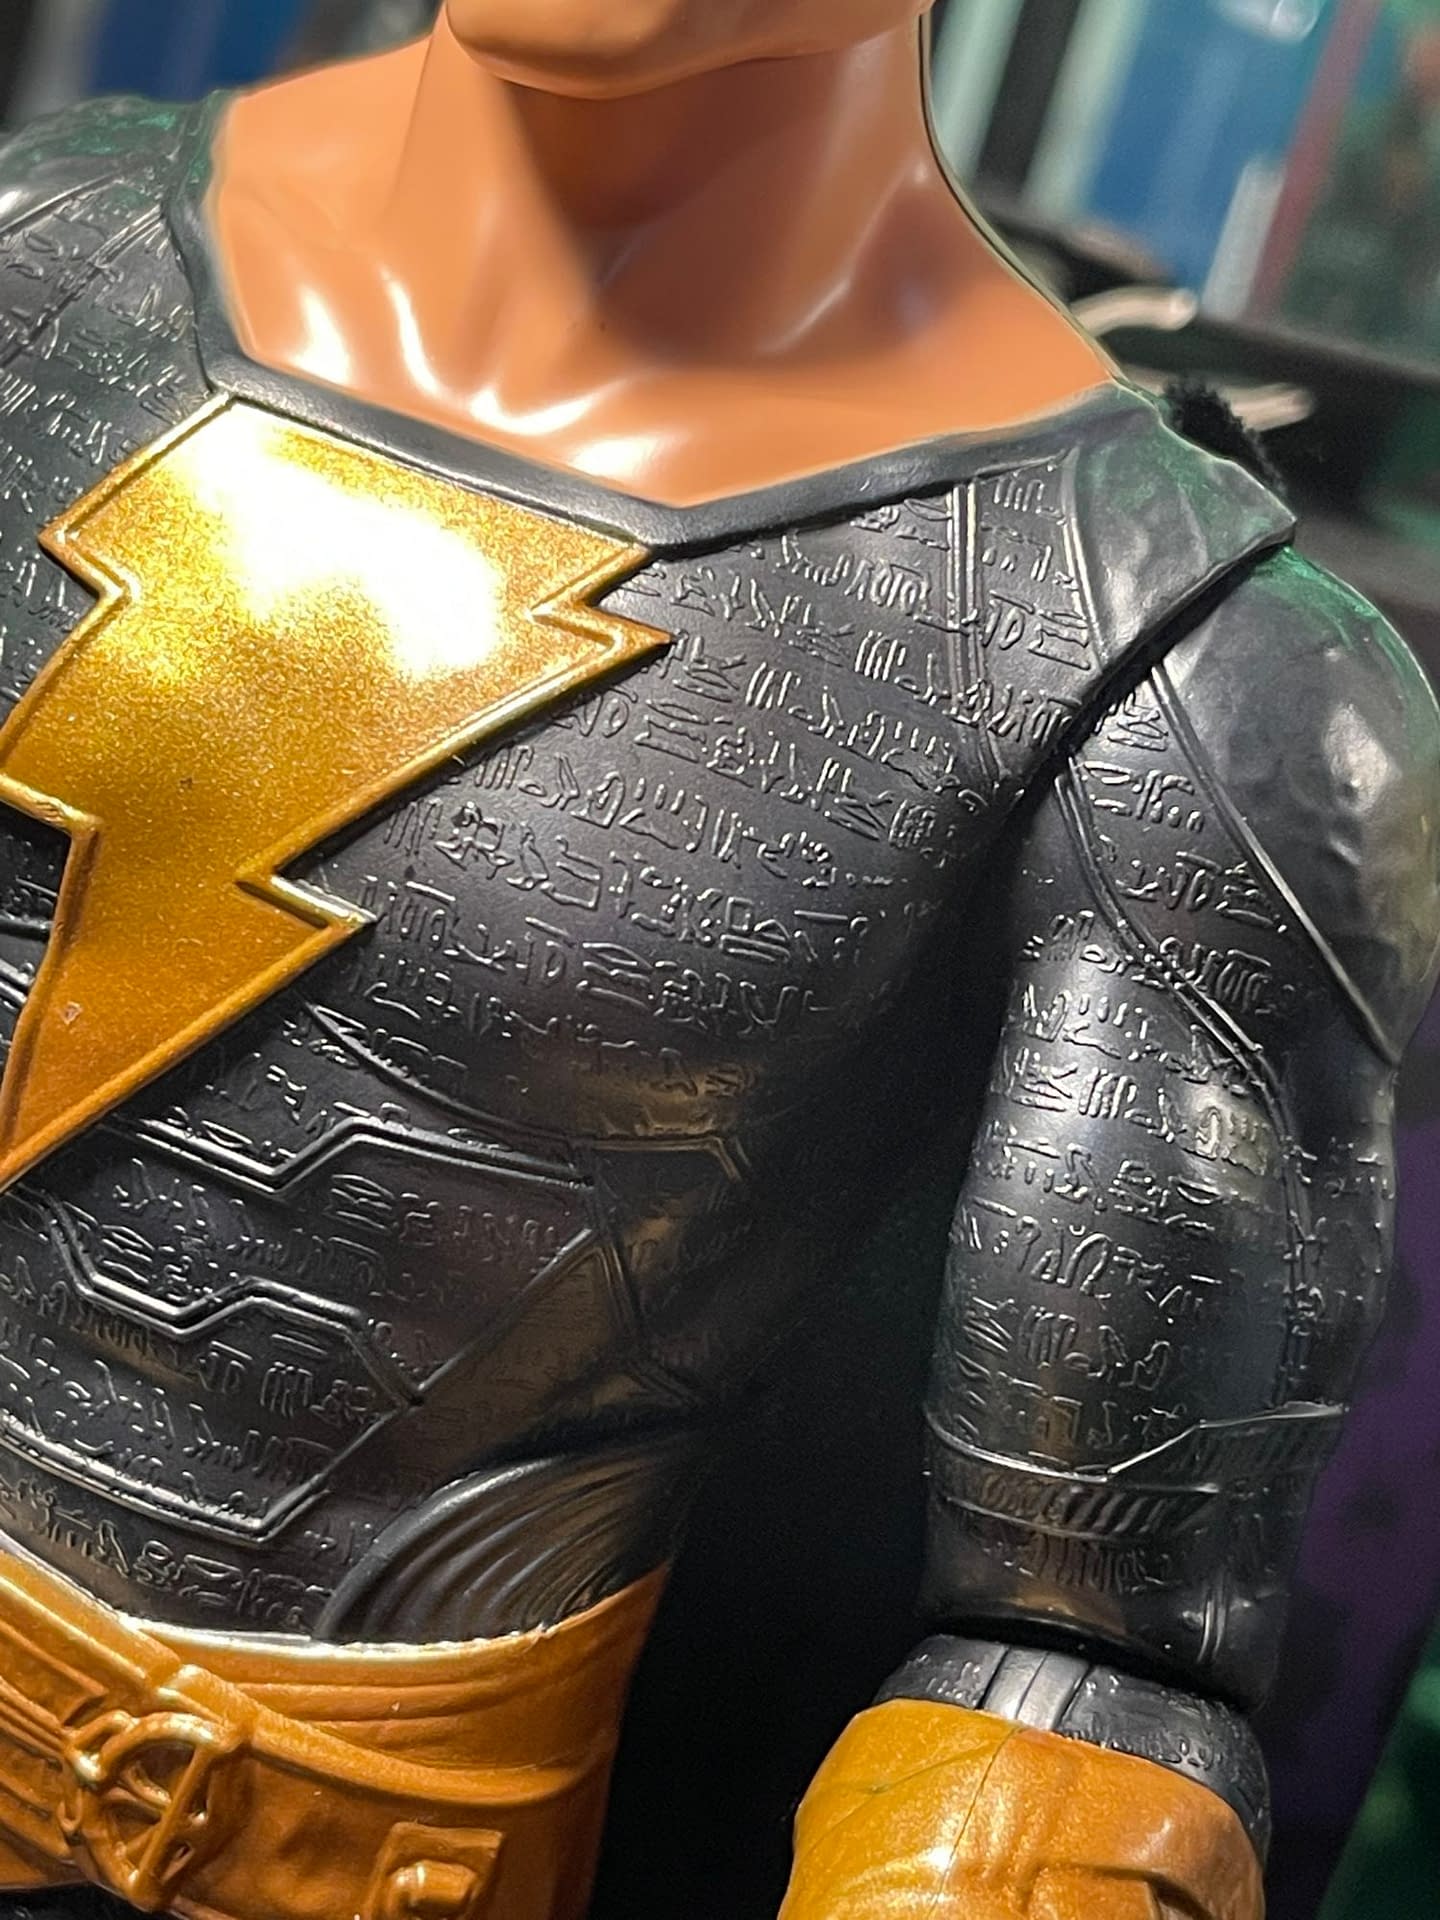 Capture Lightning in a Bottle with Our Black Adam Gift Guide